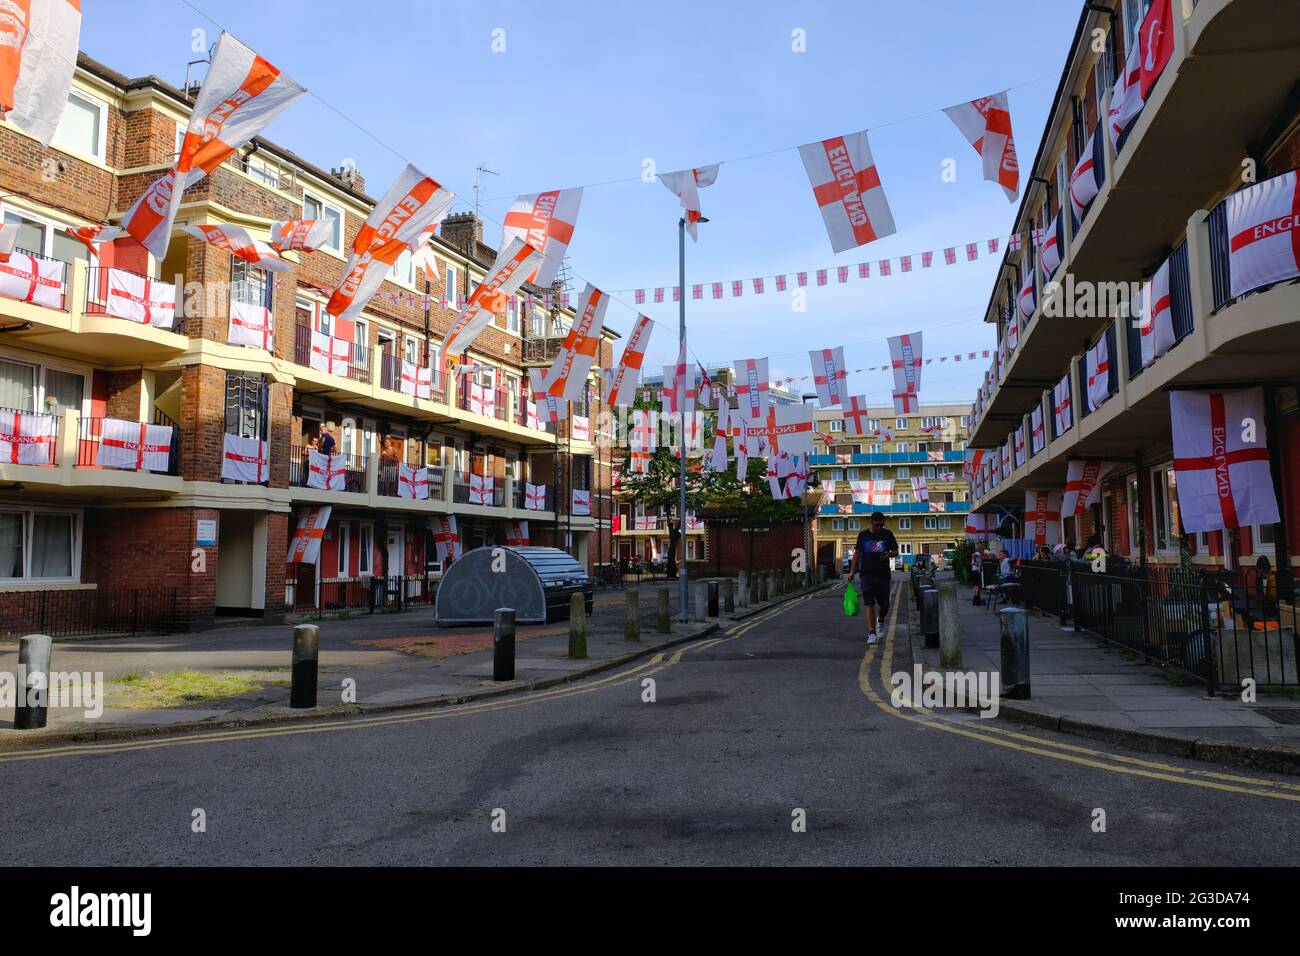 London, UK. Residents of Kirby Estate celebrate Euro 2020 by putting up over 400 St George's flags on balconies as the football tournament commences. Stock Photo